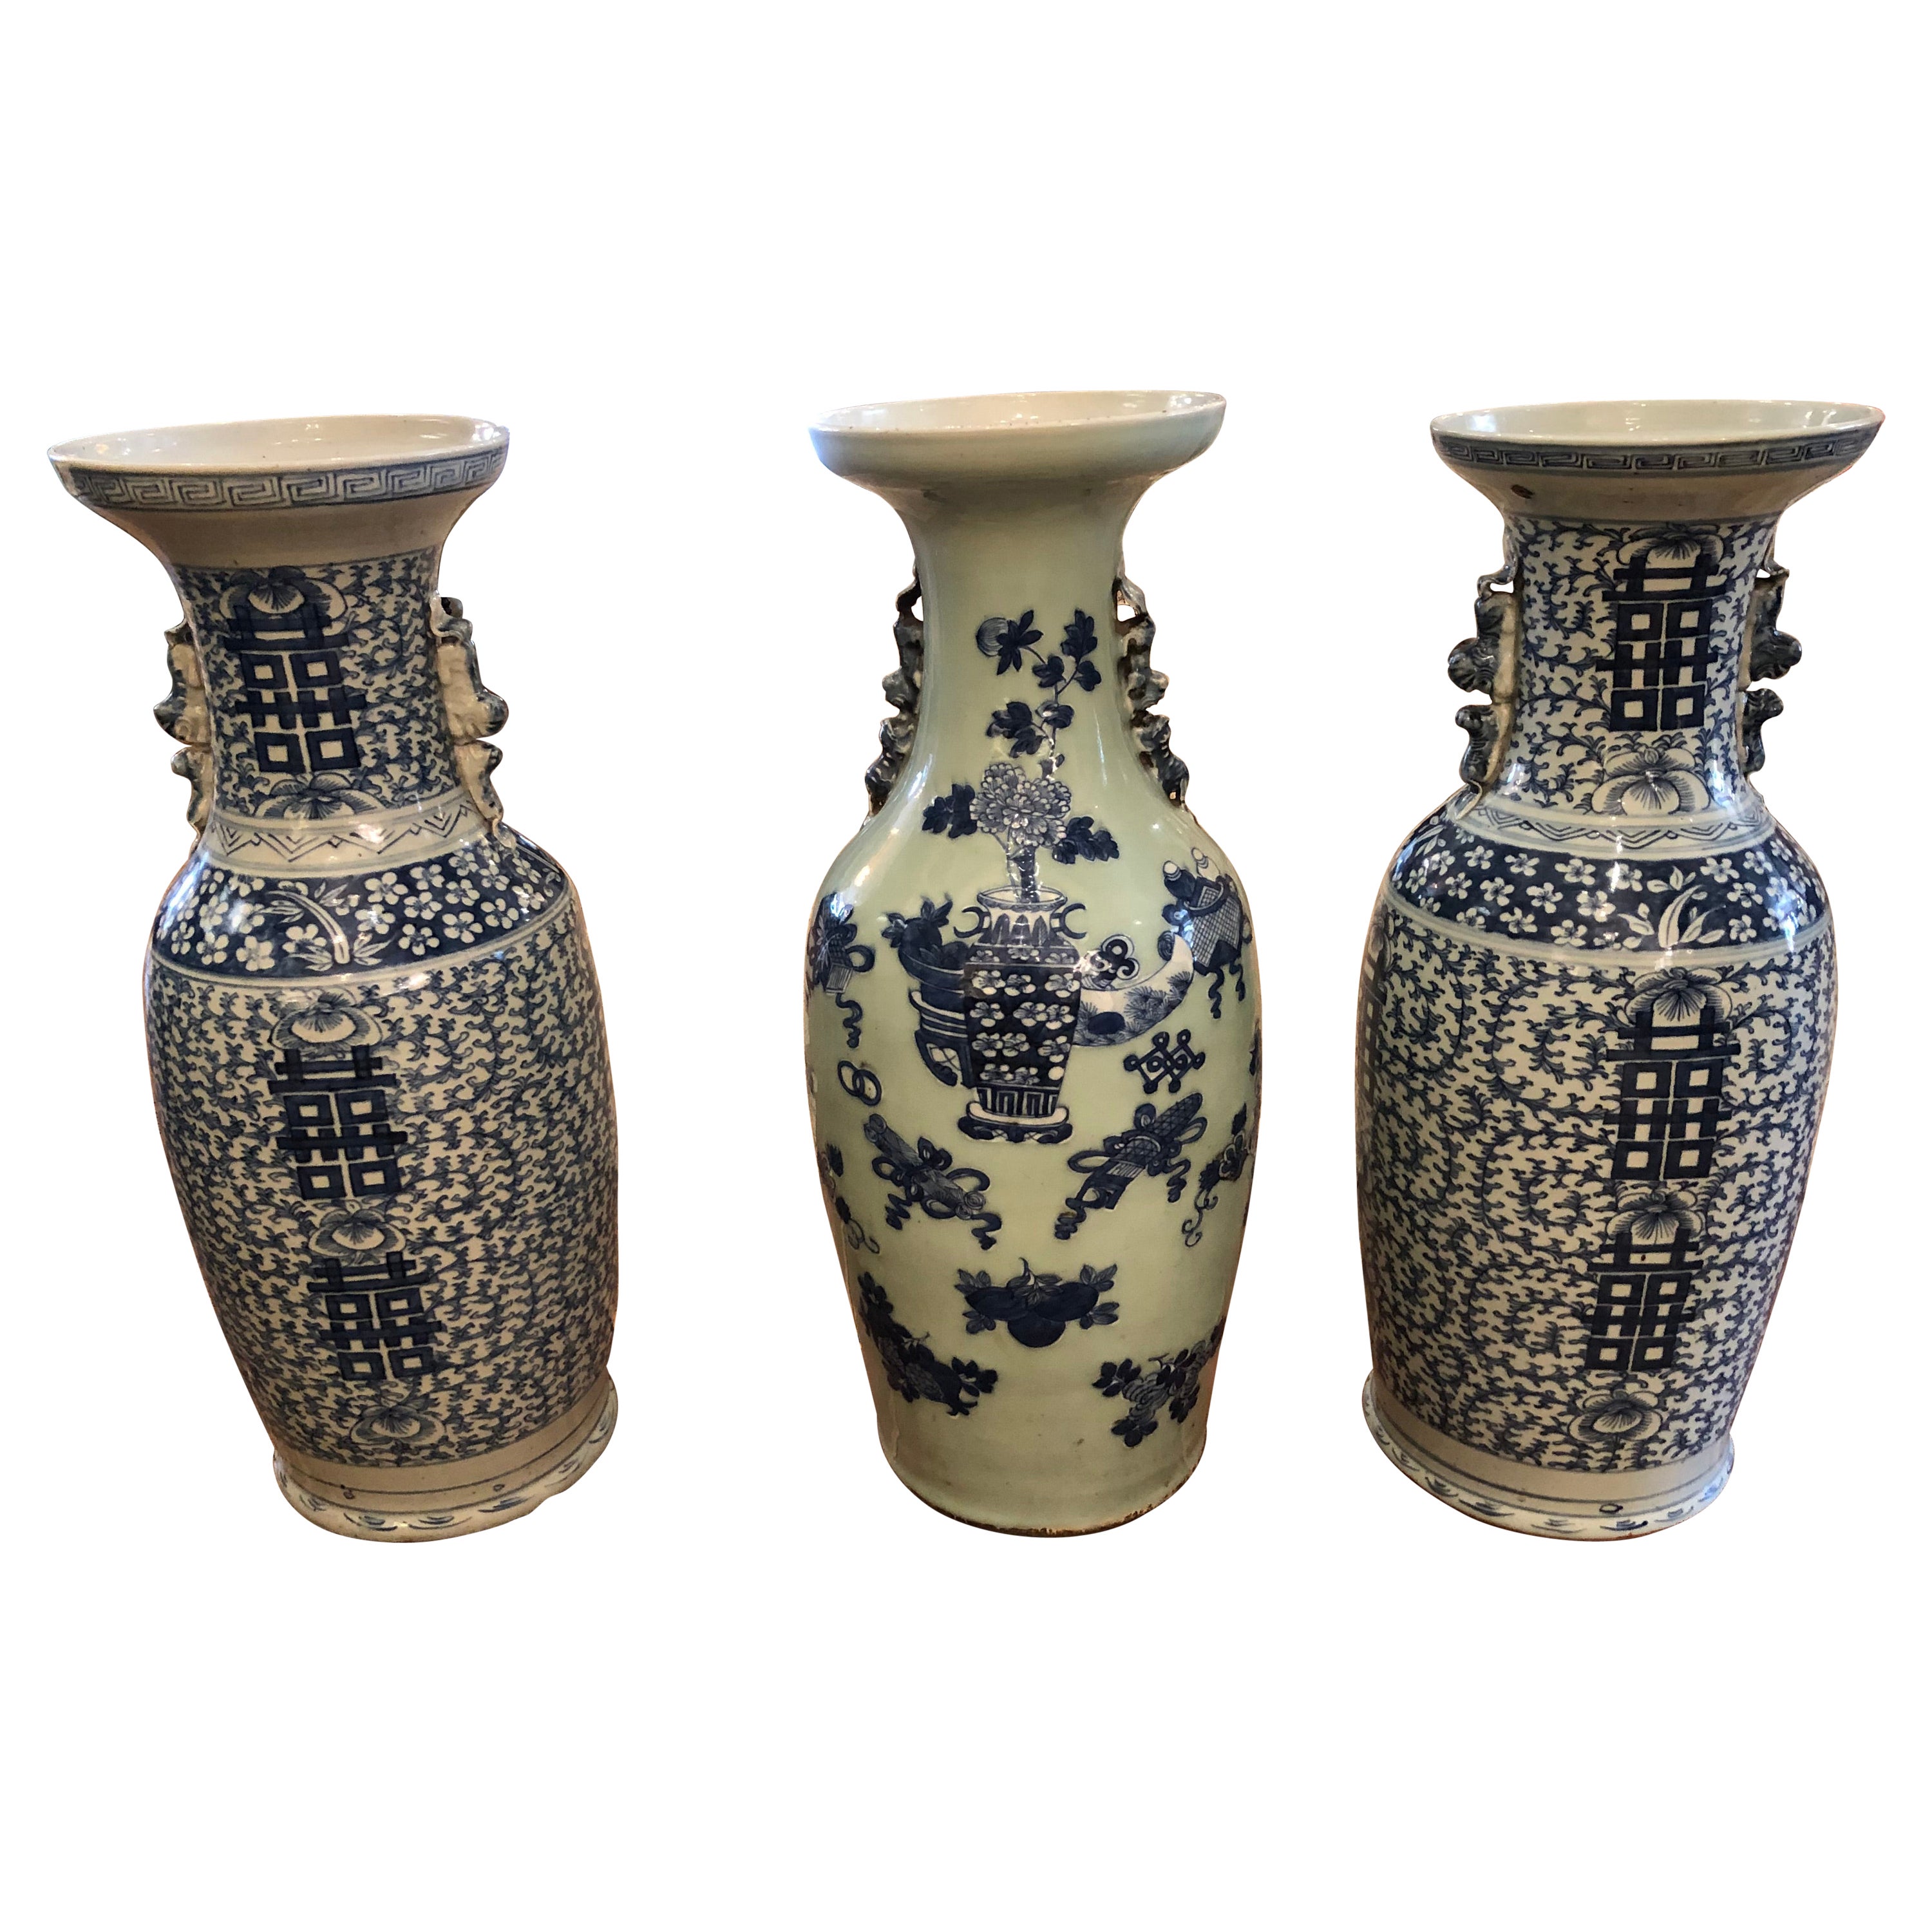 Very Large Impressive Trio Collection of 3 Blue & White Chinese Vases For Sale